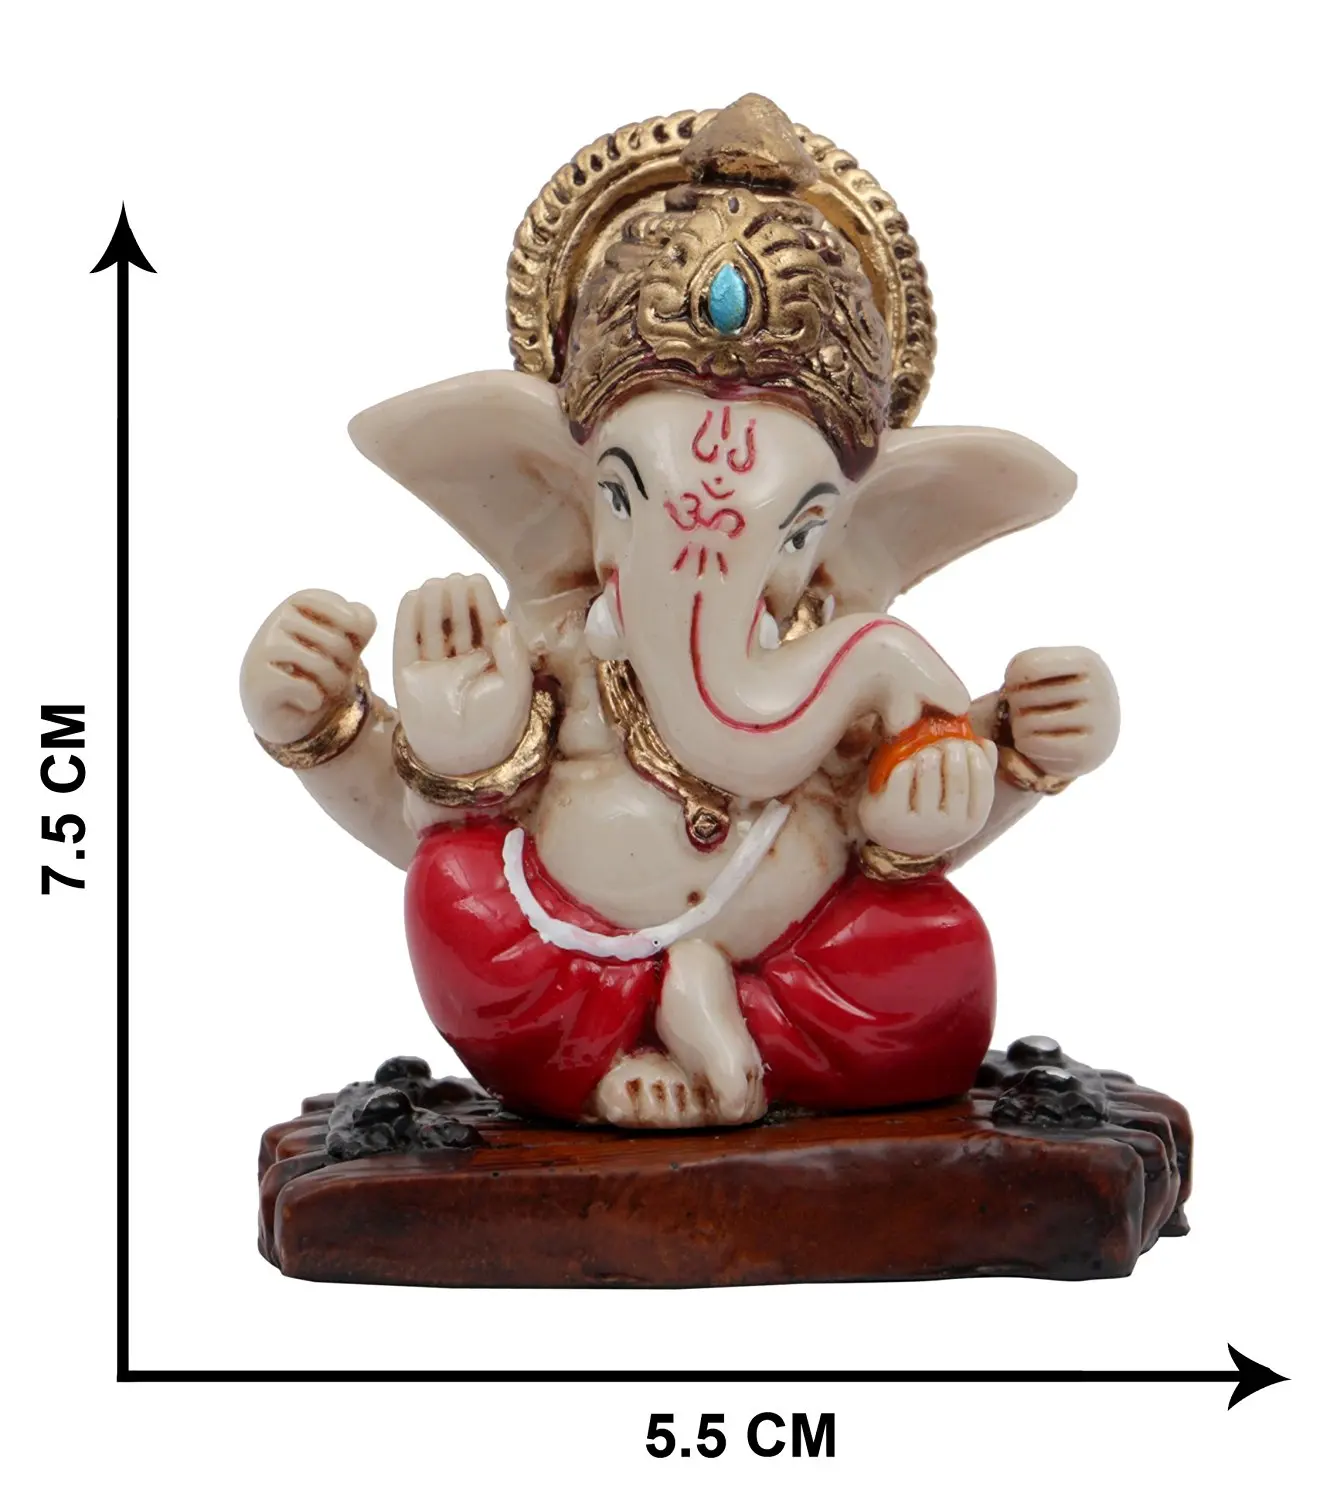 Affaires Ideal Gift Ideal Gift to Your Loved Ones G-411 Lord Ganesh Ganpati Idol for car/Office Decor 